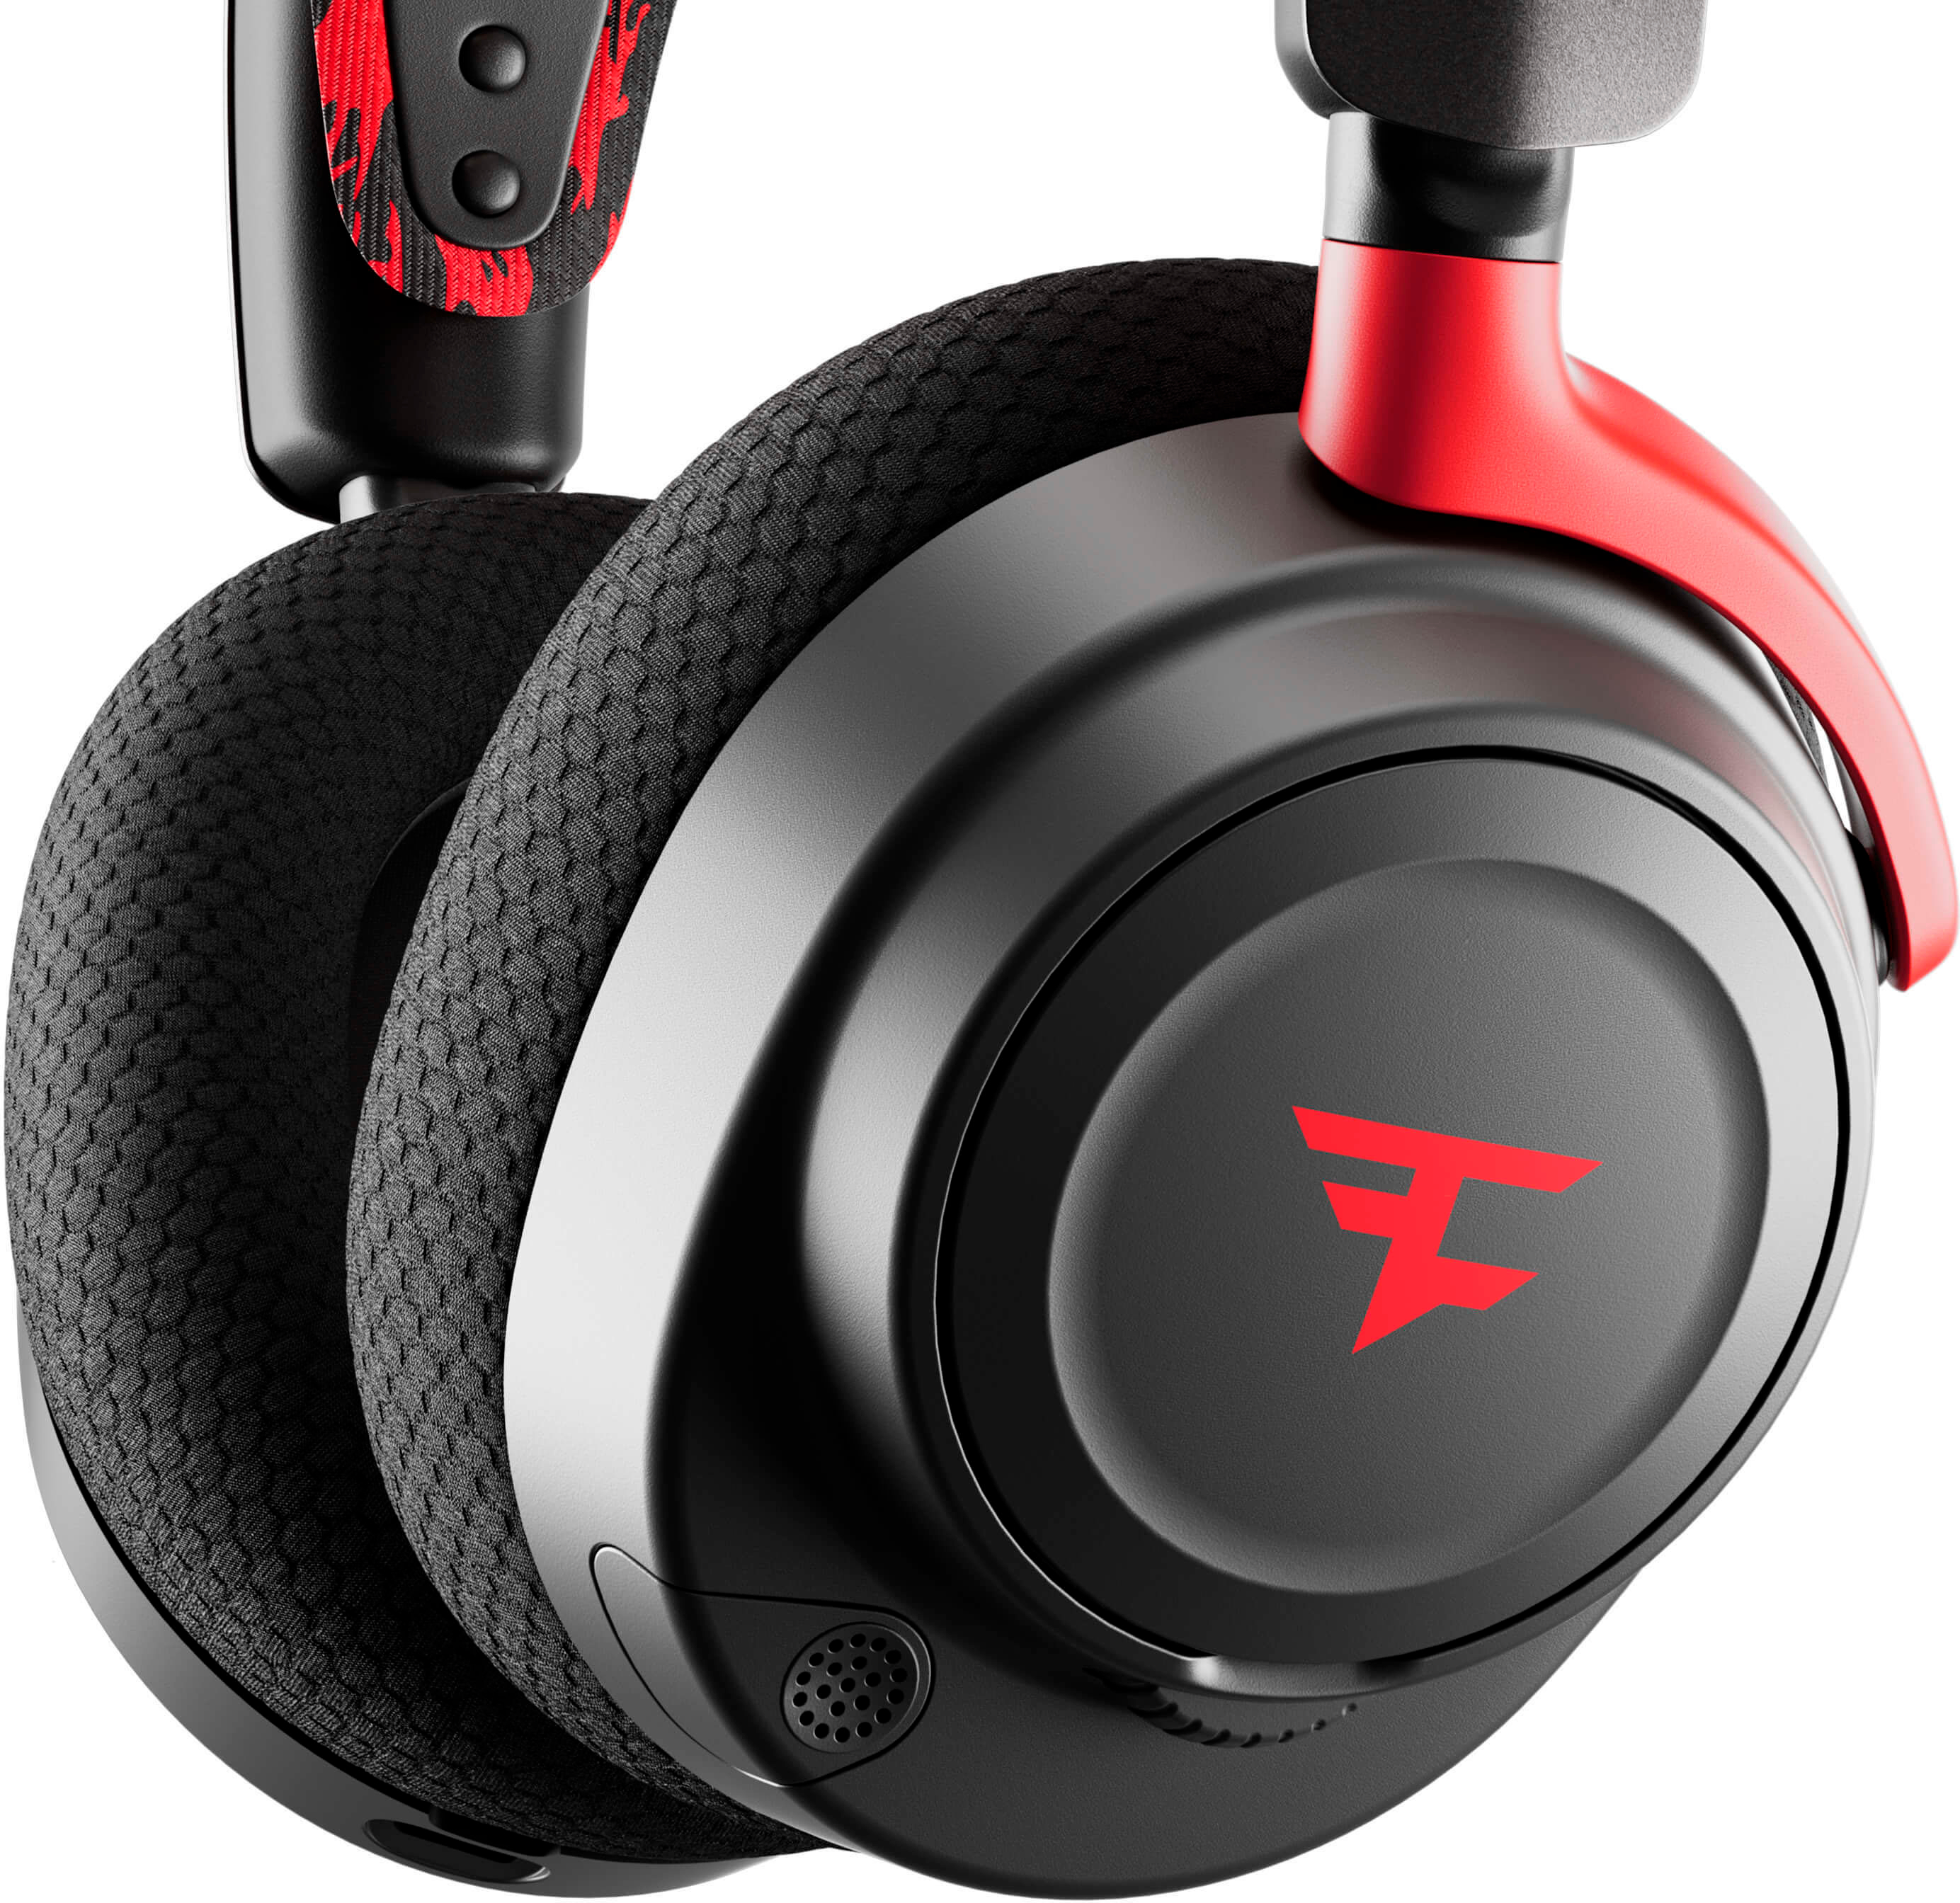 SteelSeries Gaming Clan PC Limited - FaZe 61556 Nova Edition for 7 Wireless Best Arctis Buy Headset